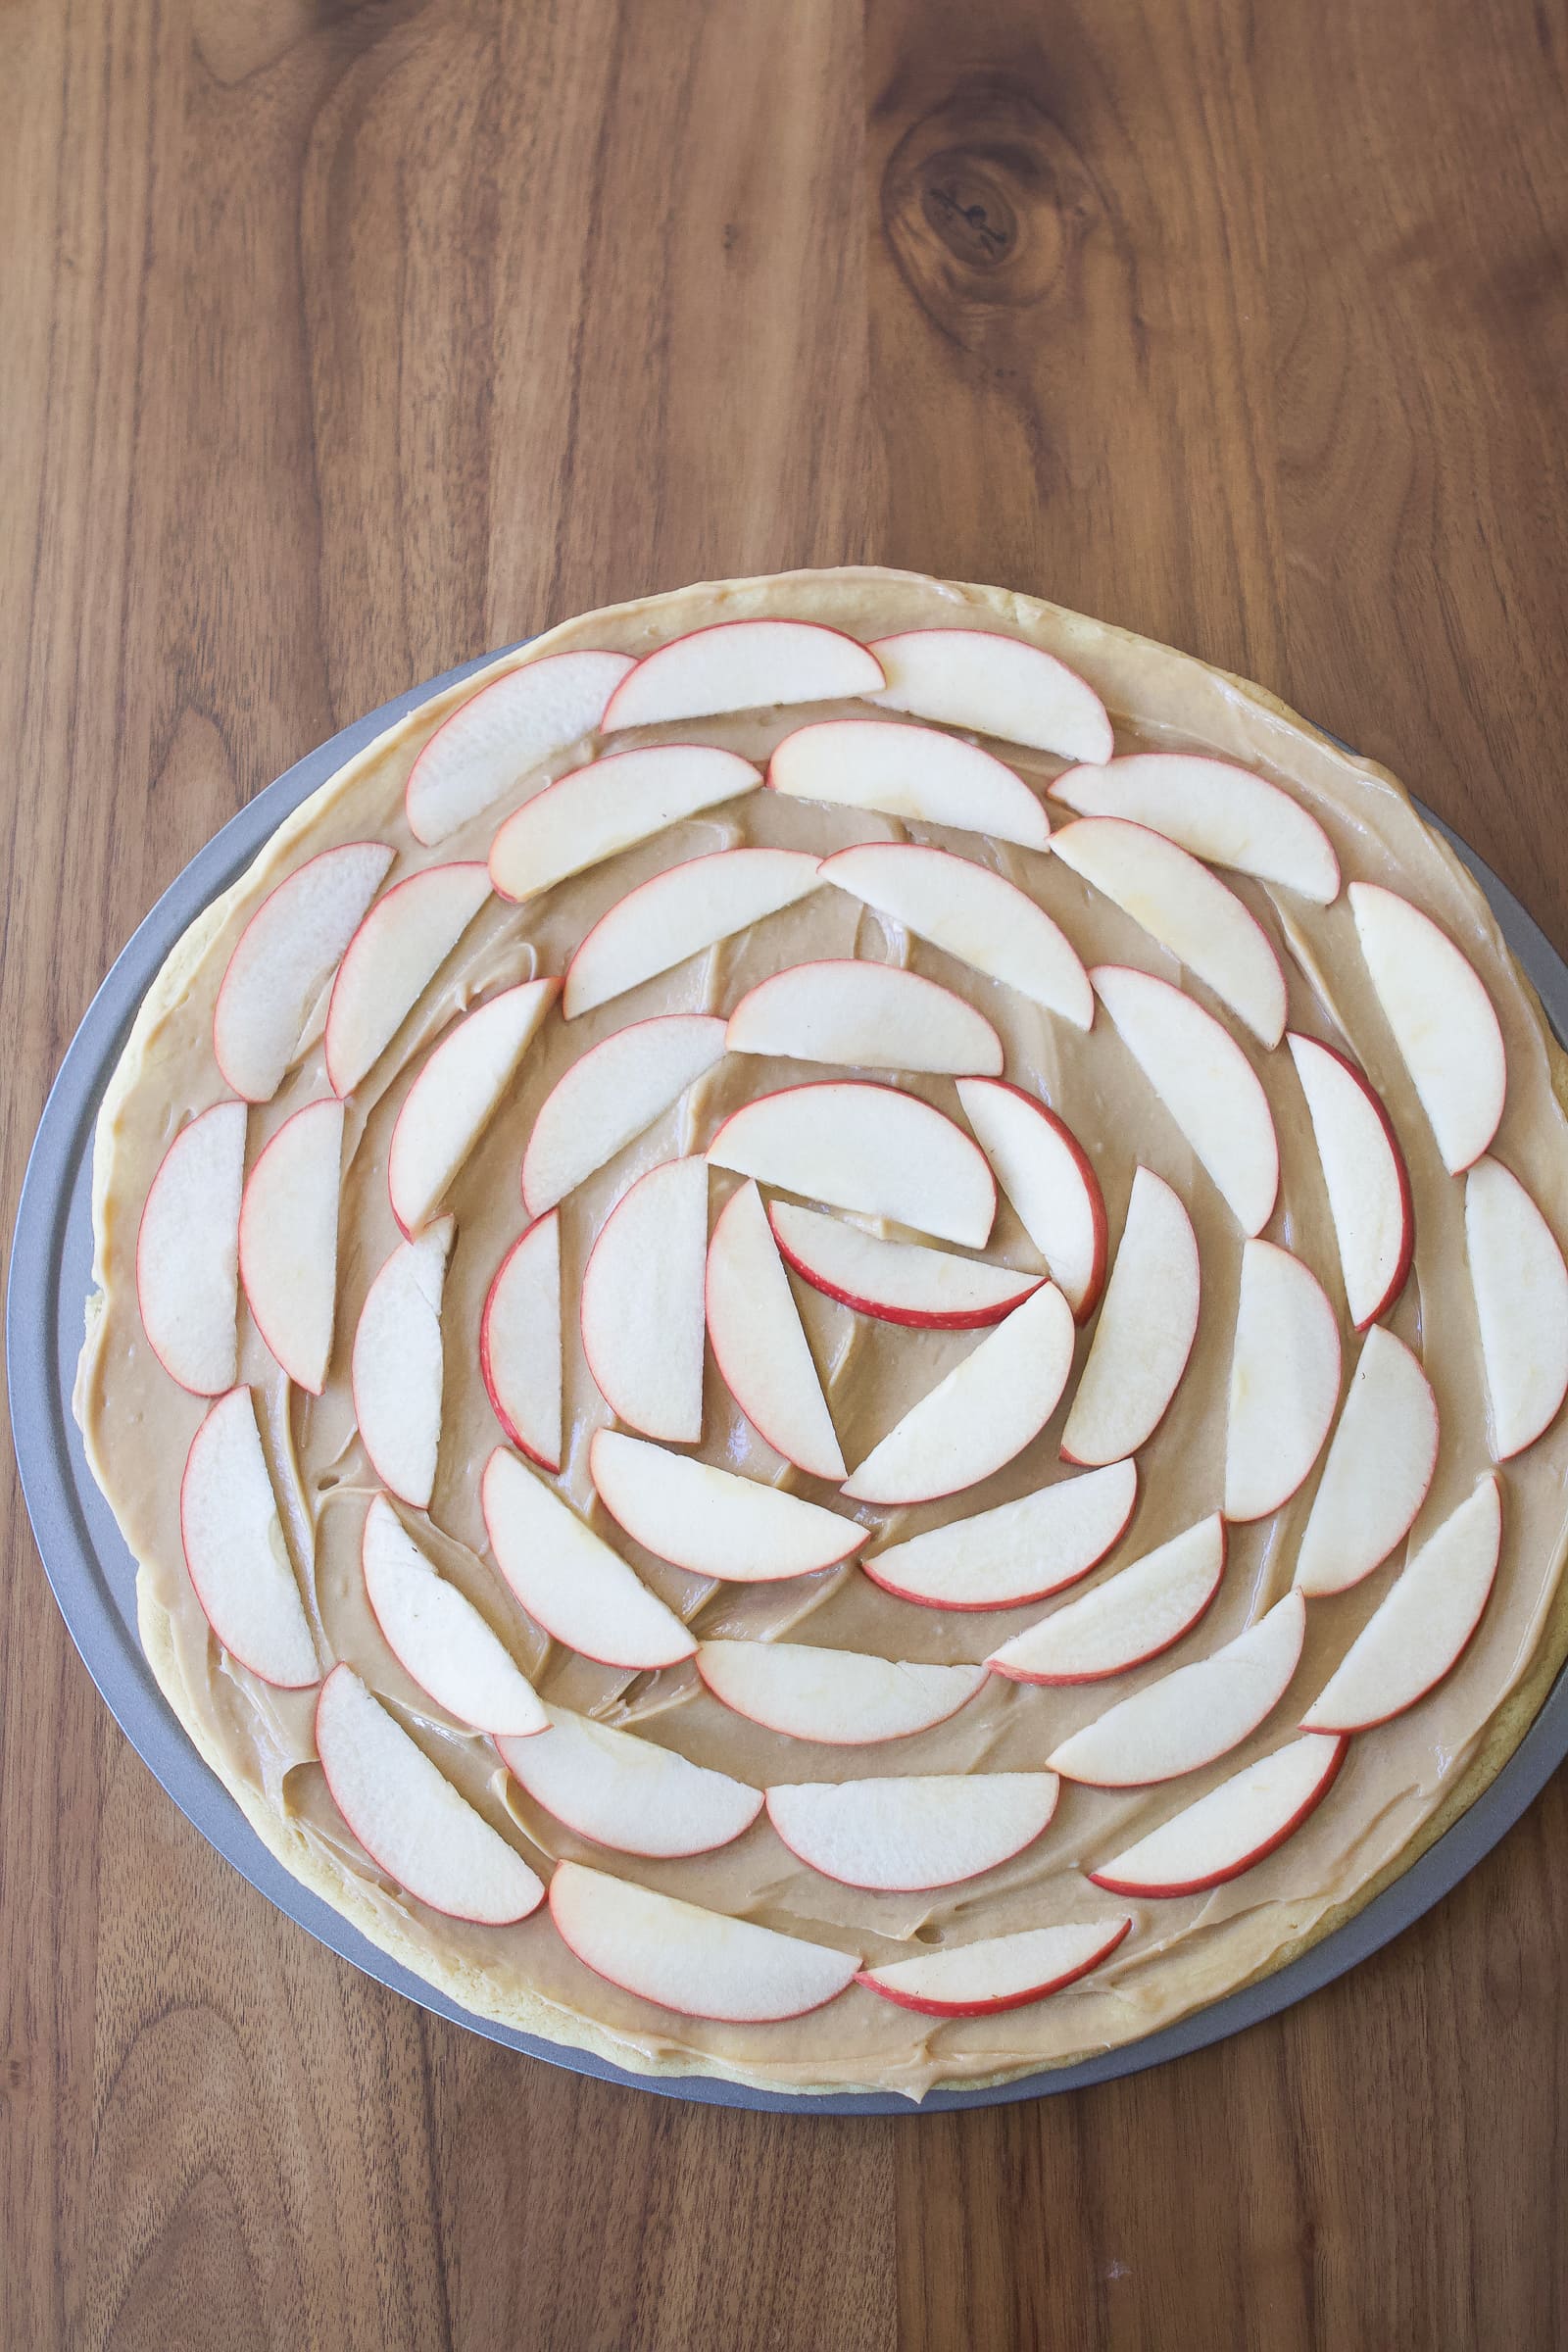 Add apples in a fan on top of your pizza